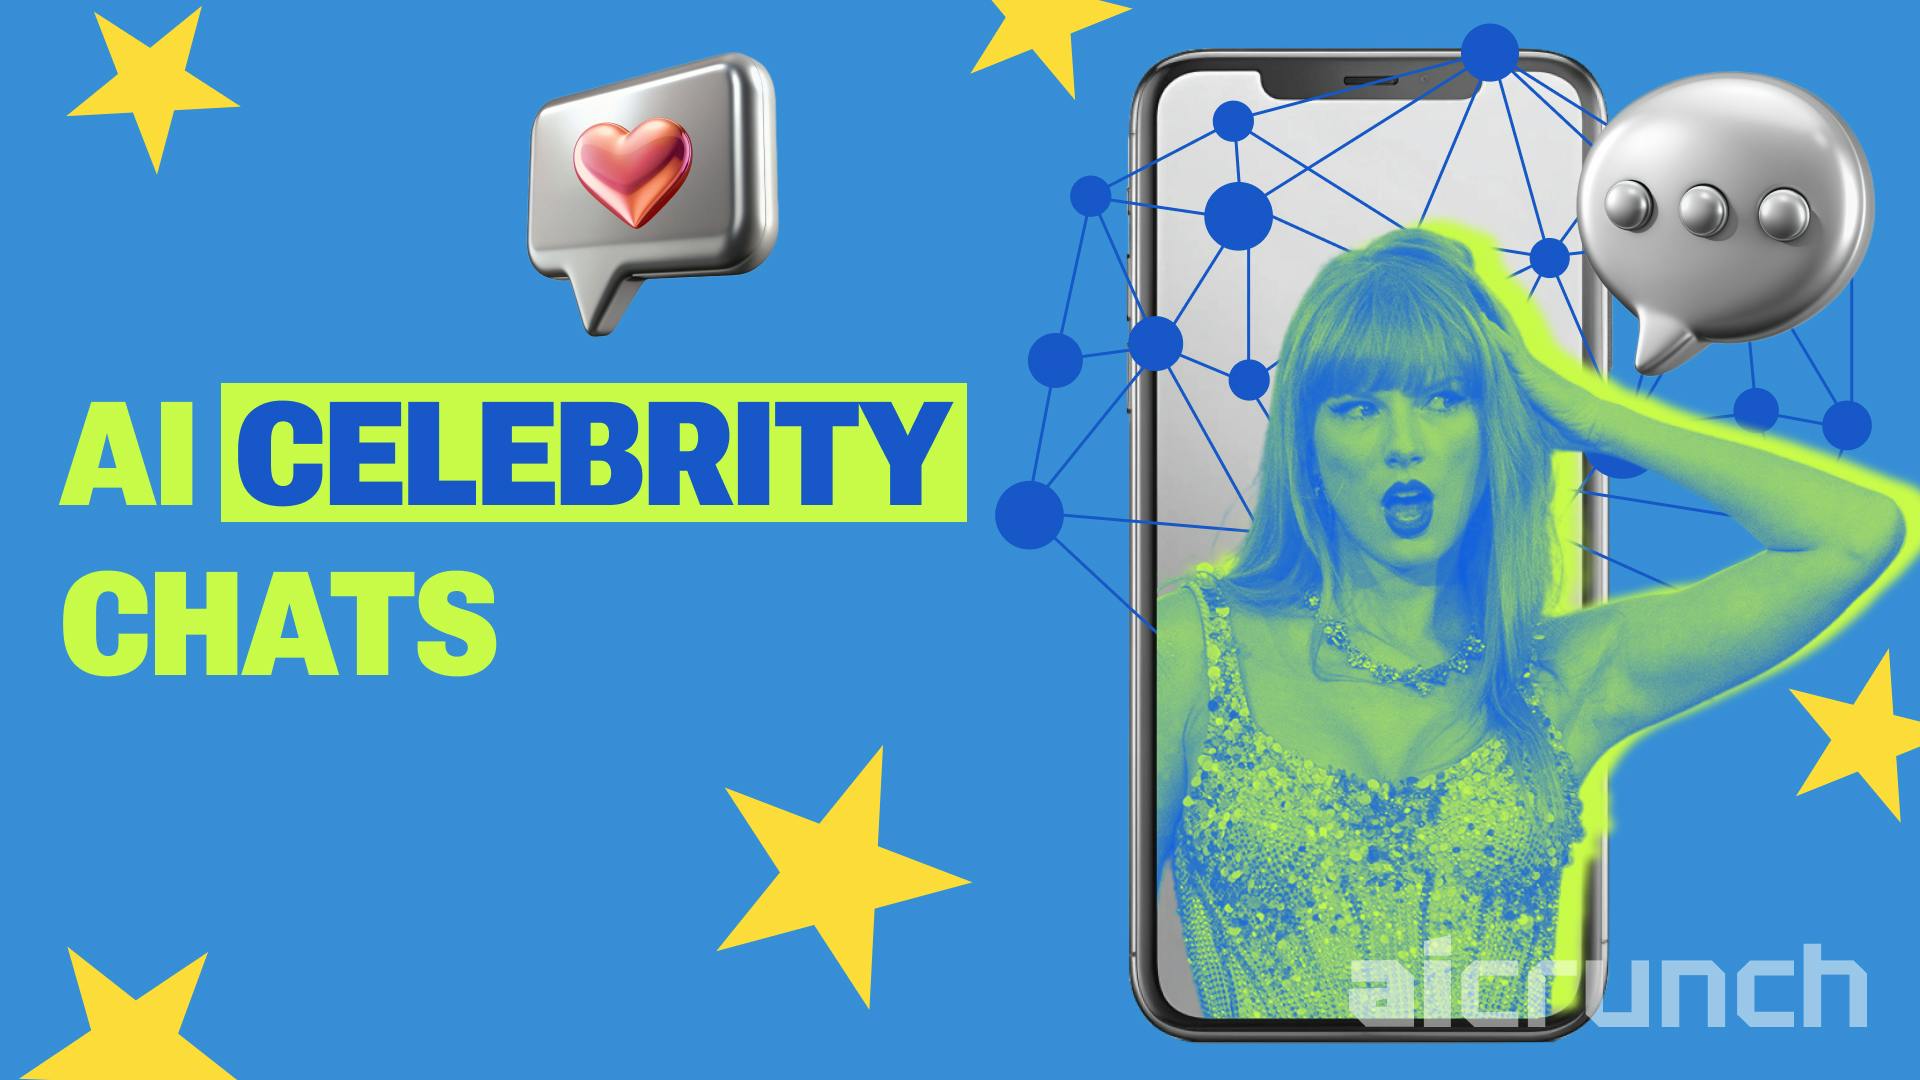 Unleashing potential: celebrity AI chats and role-play - your guide to mastery